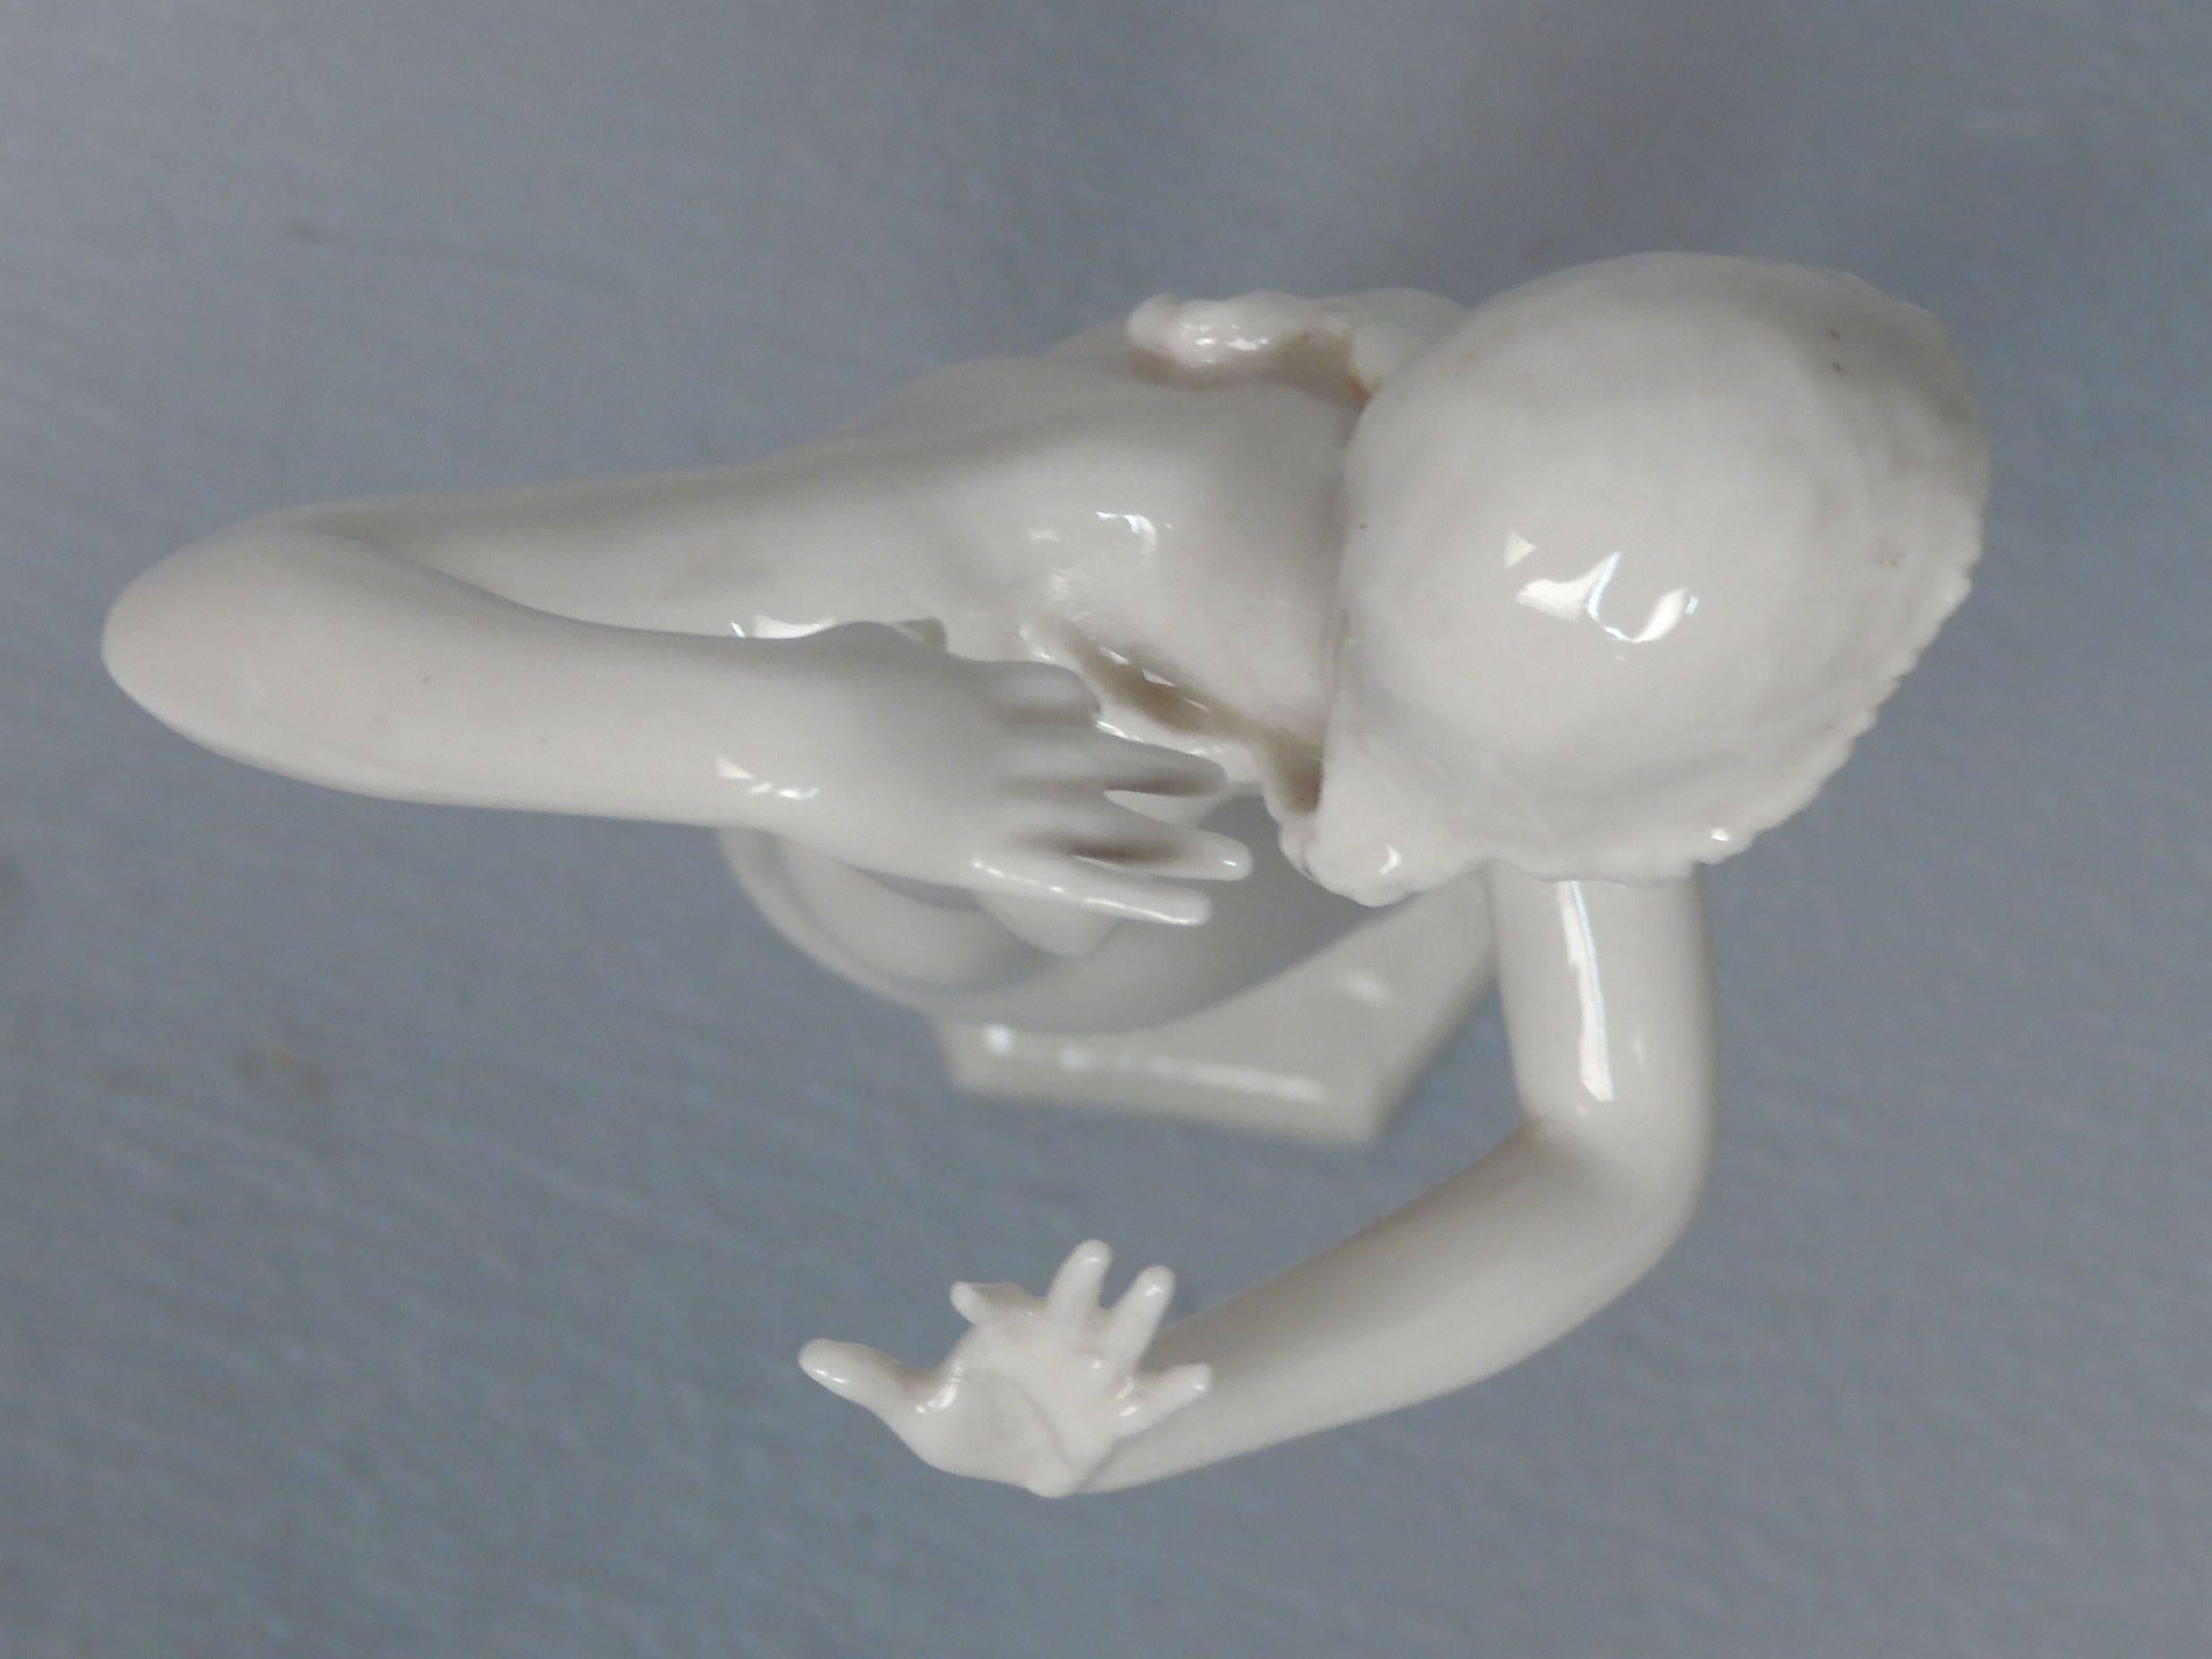 Mid-20th Century Art Deco Female Nude Figurine by Carl Werner for Hutschenreuther Porcelain